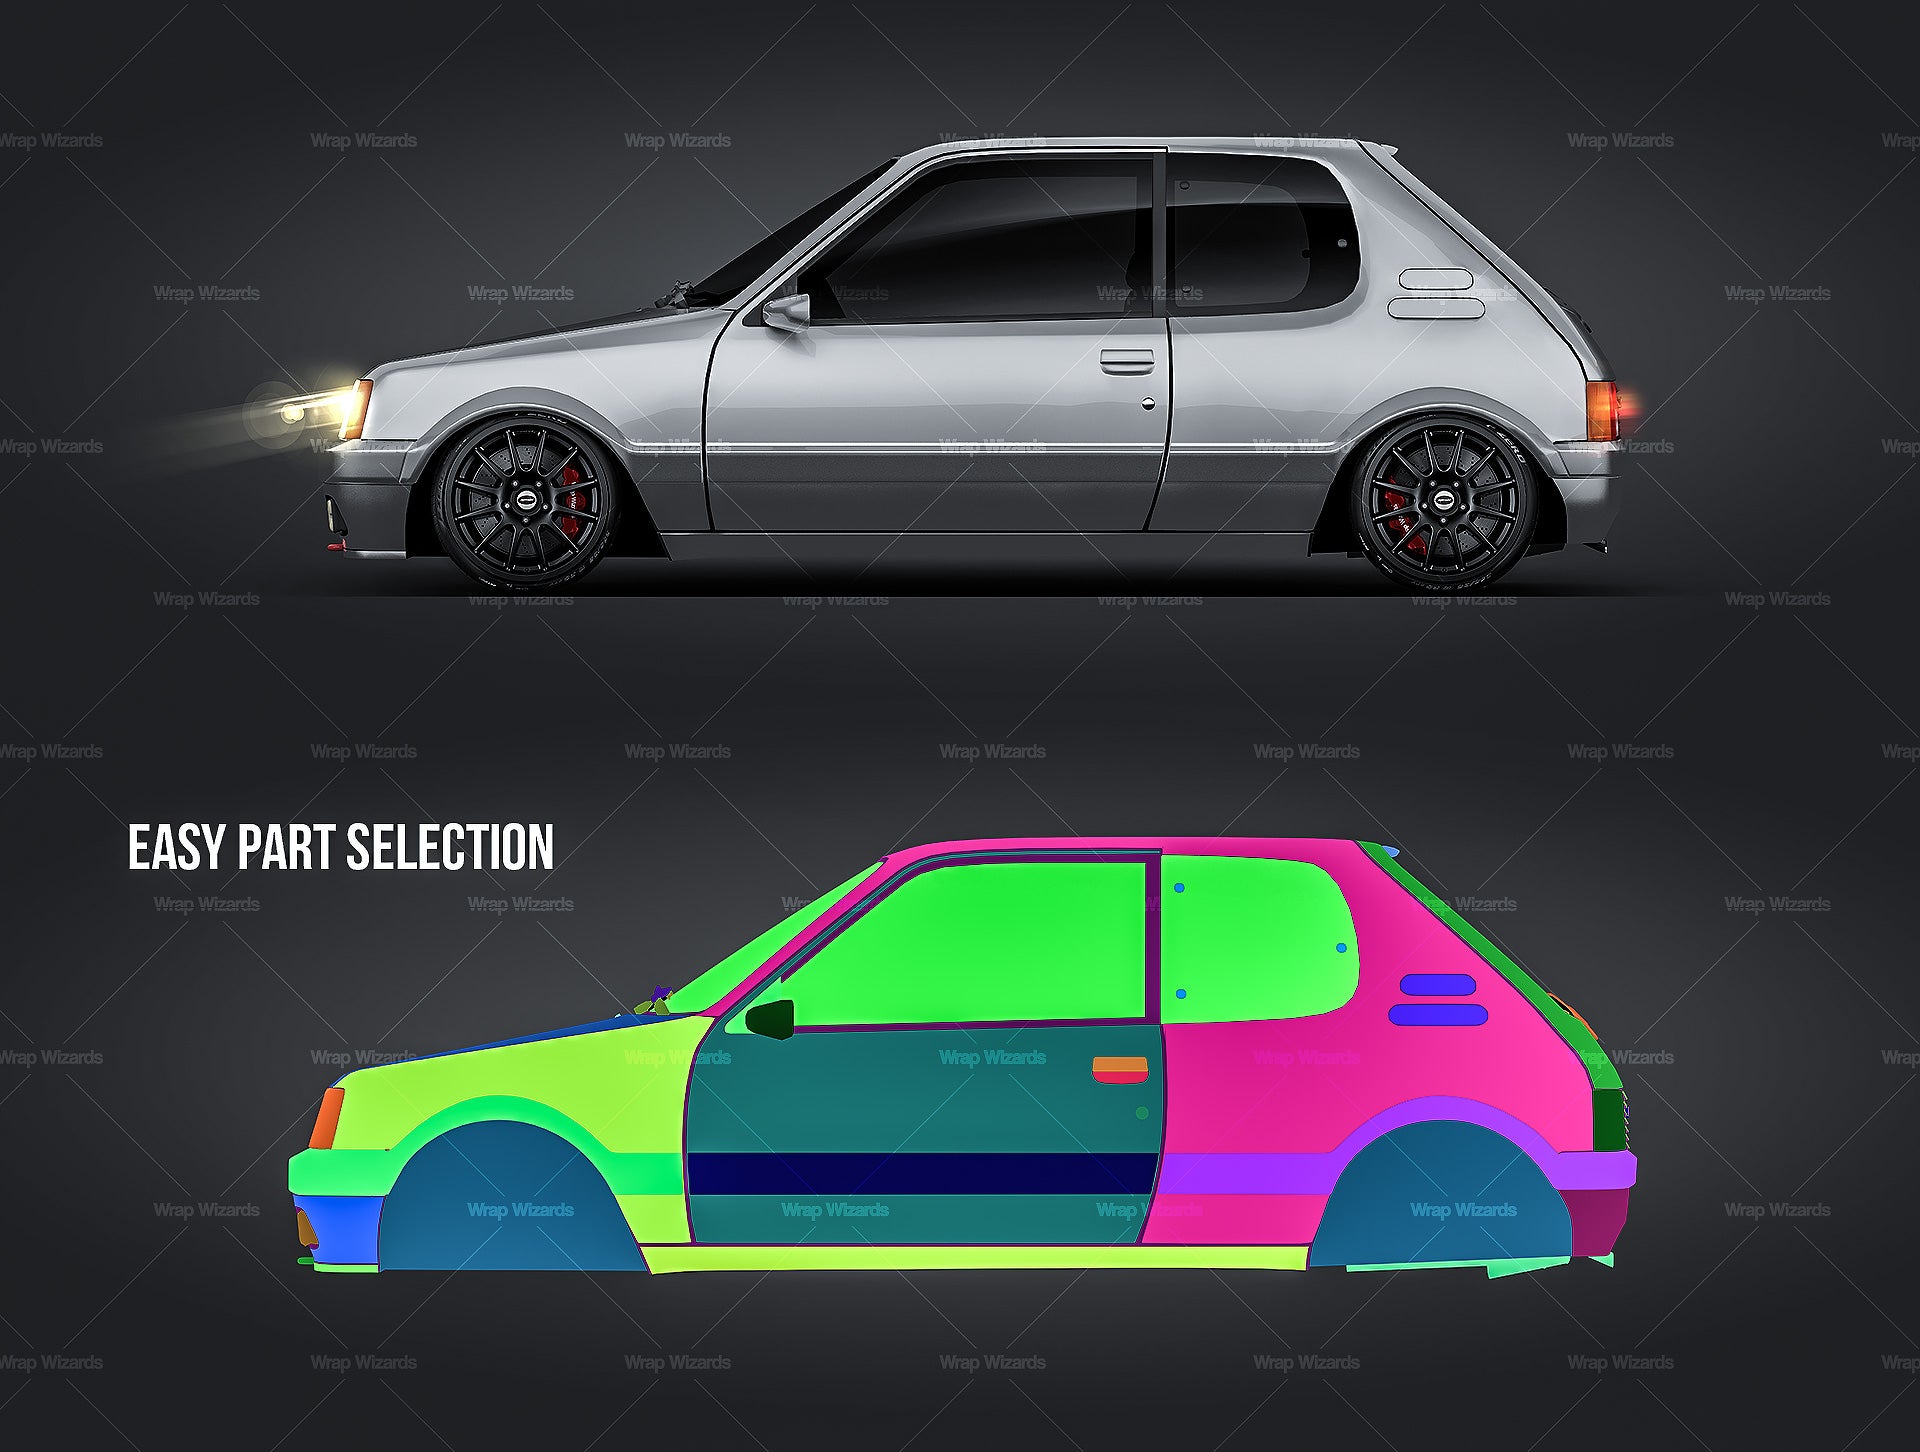 Peugeot 205 GTI 1989 glossy finish - all sides Car Mockup Template.psd